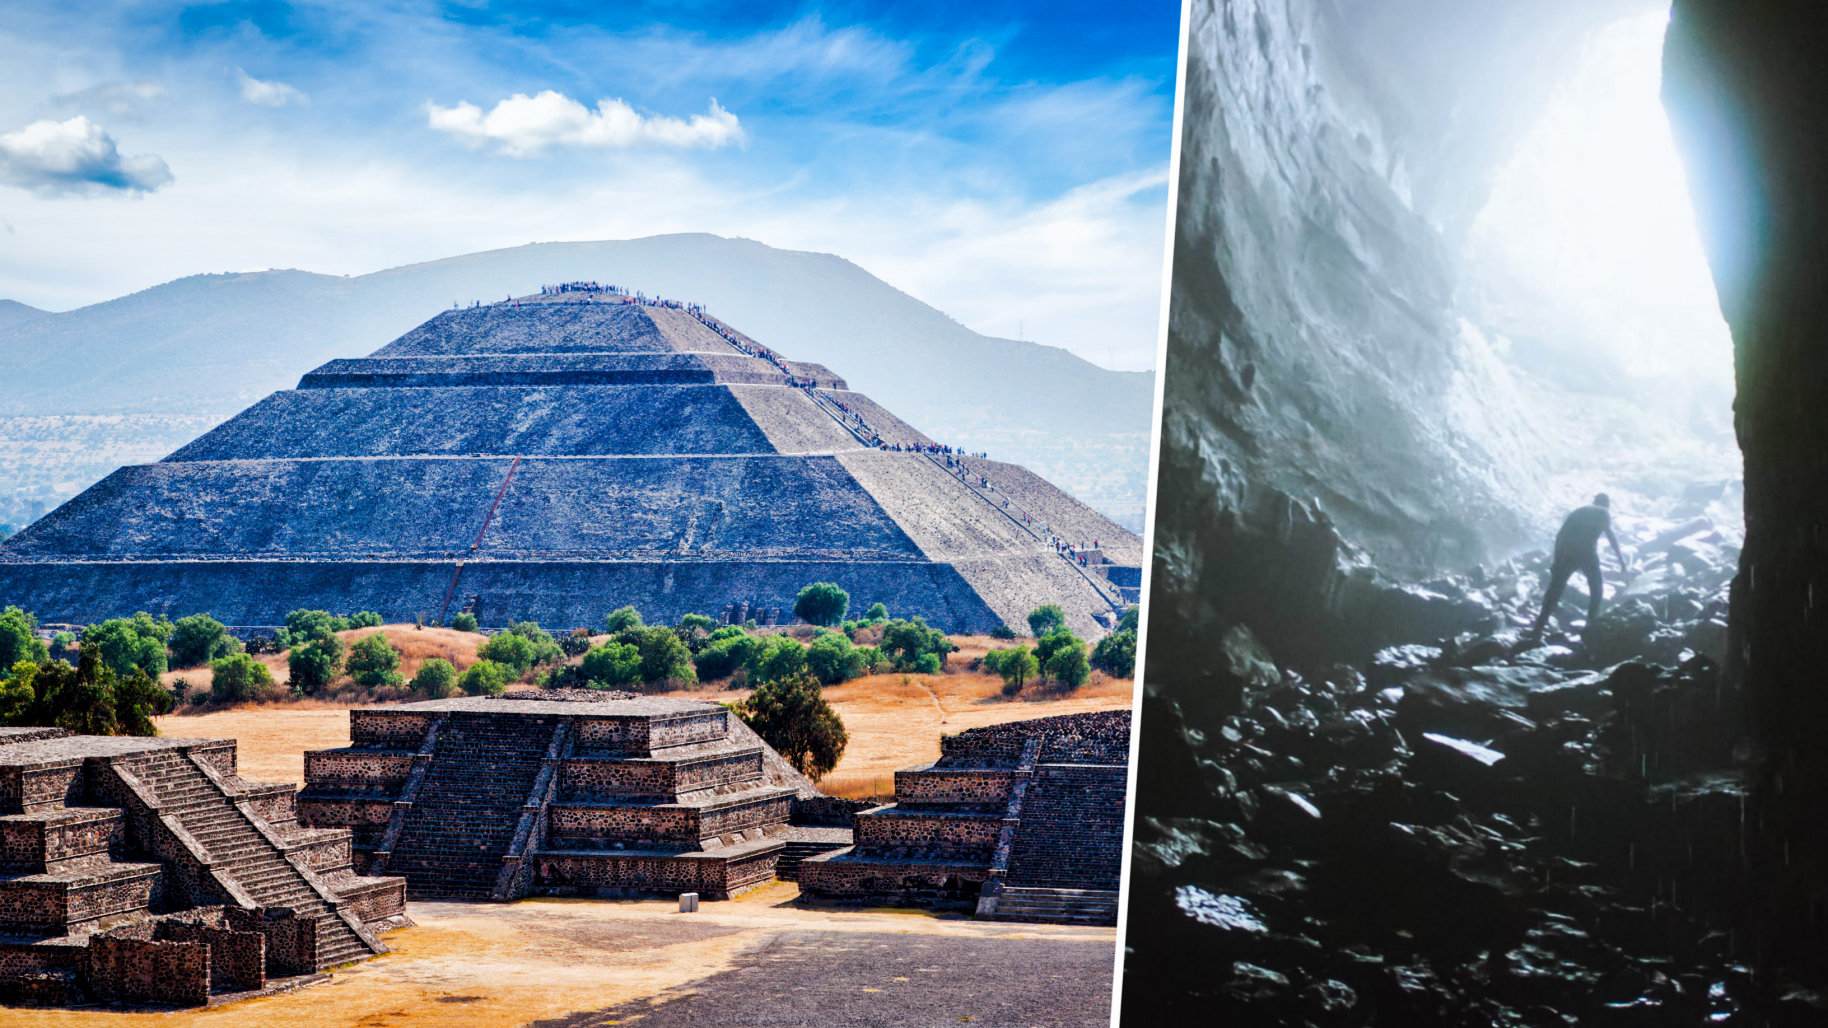 The 'passage to the underworld' discovered beneath the Pyramid of the Moon in Teotihuacán 1